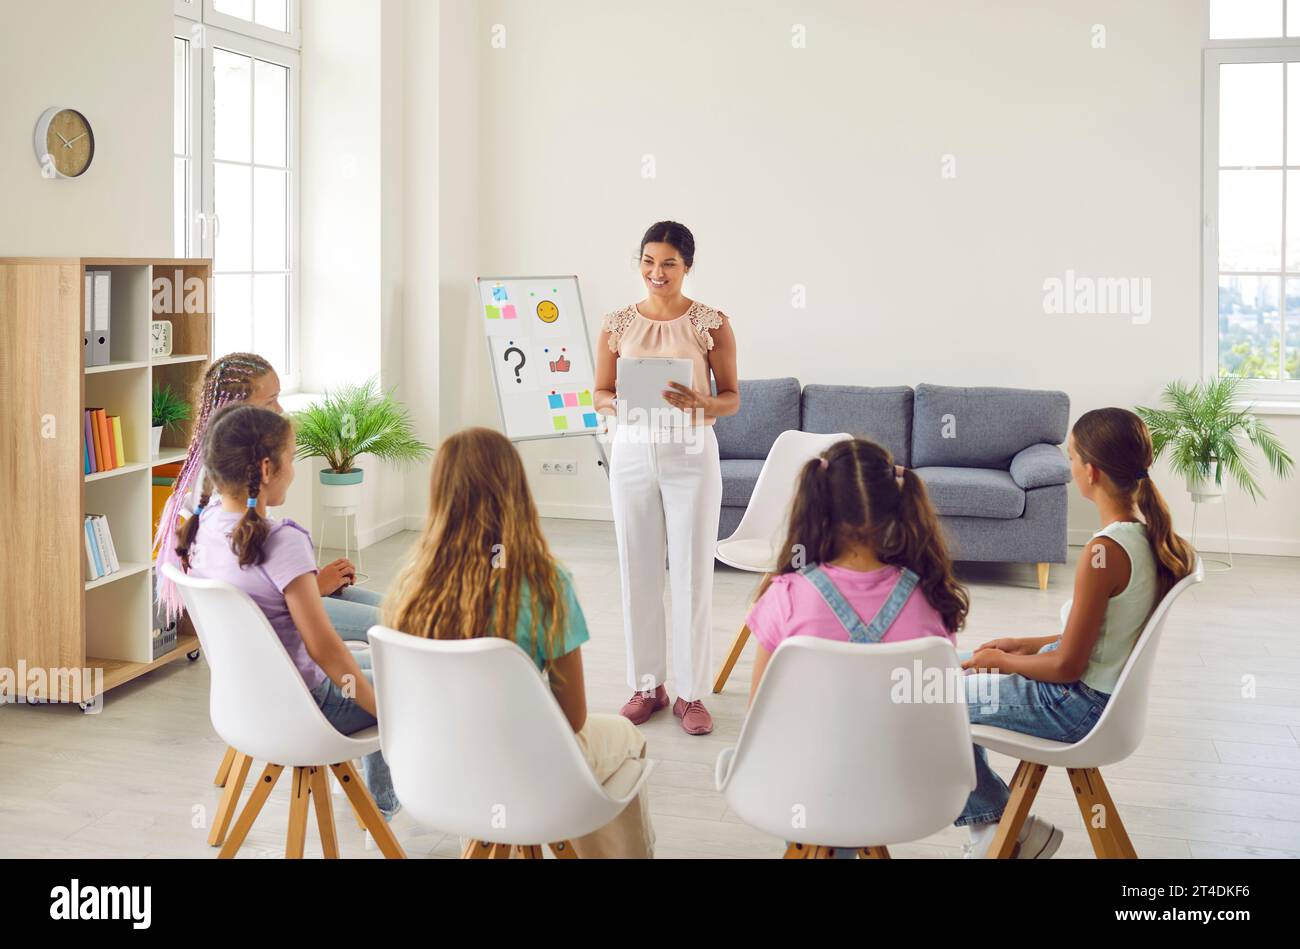 Friendly woman conducting psychological training for a group of school children girls. Stock Photo